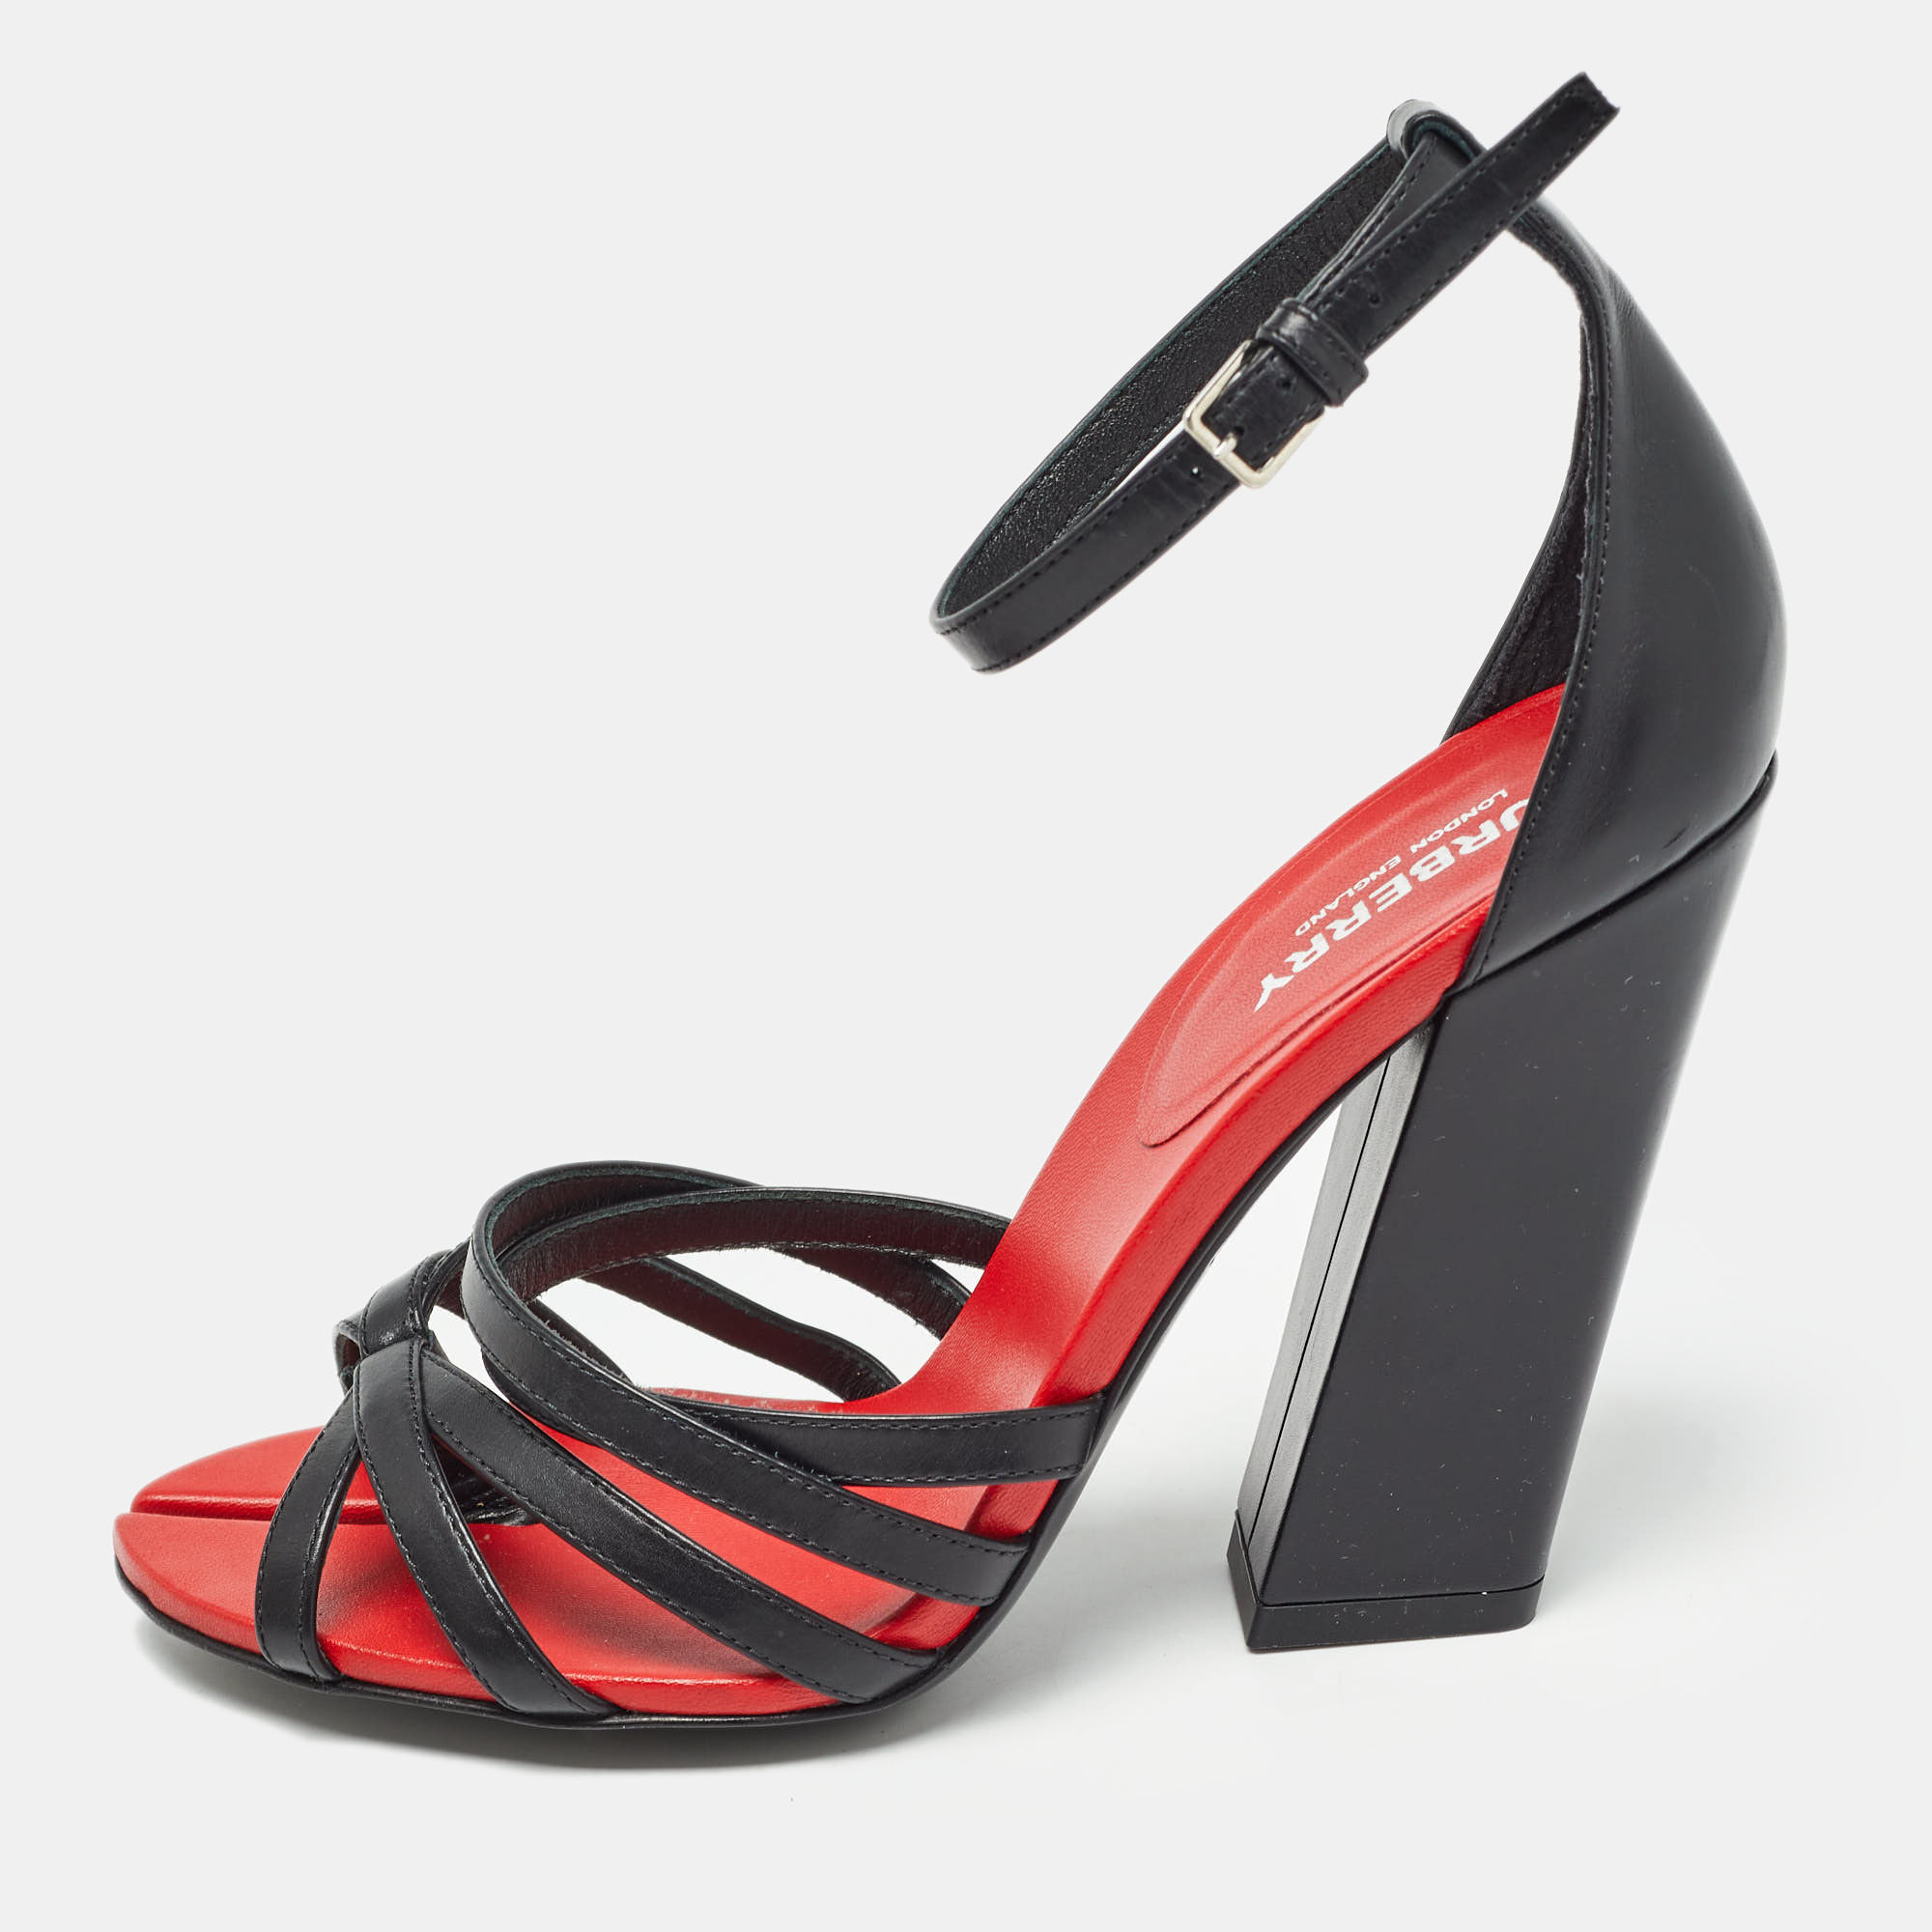 Burberry black/red leather hove heel ankle strap sandals size 36